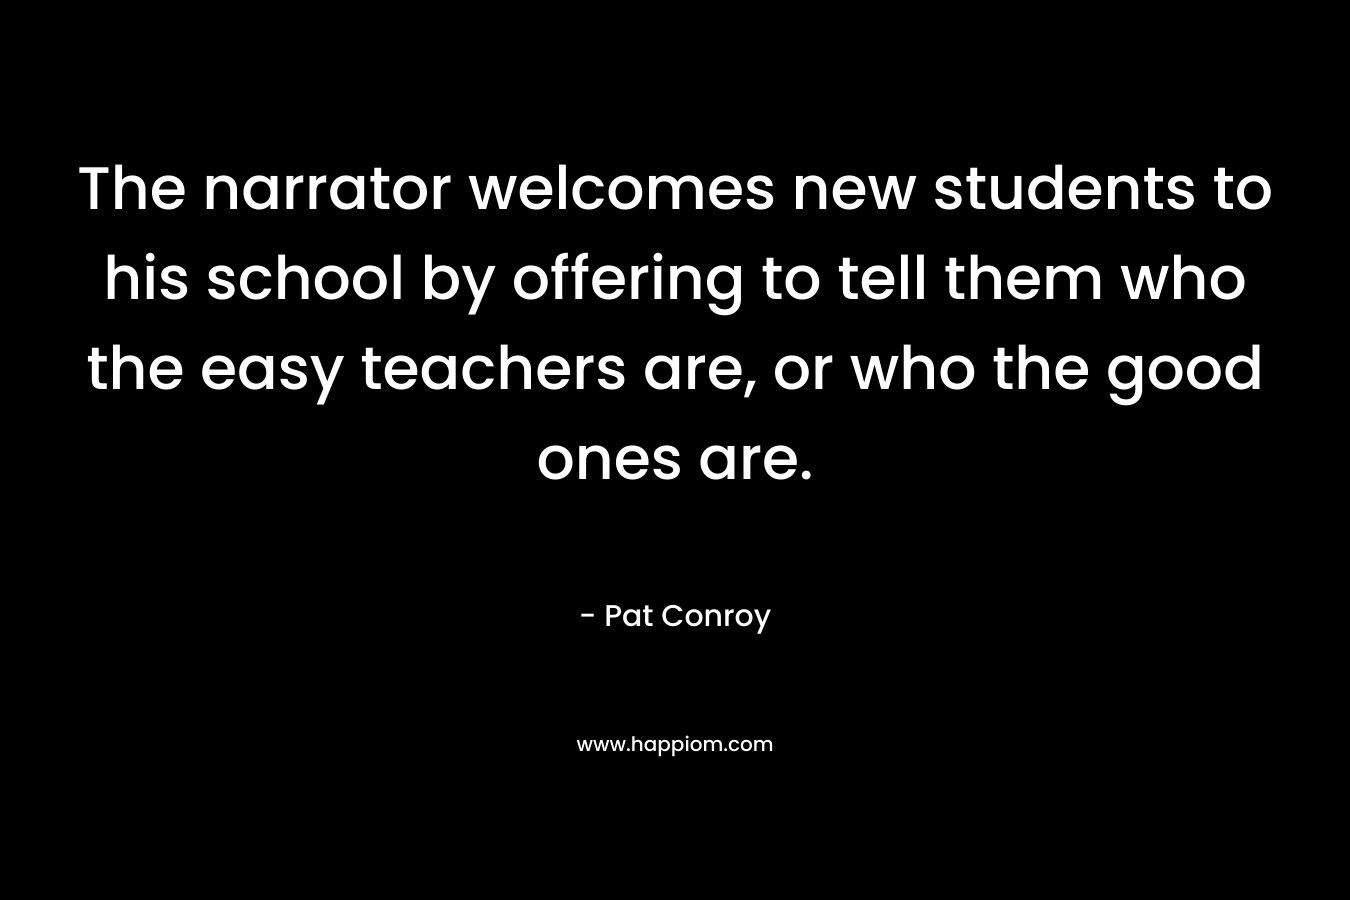 The narrator welcomes new students to his school by offering to tell them who the easy teachers are, or who the good ones are. – Pat Conroy